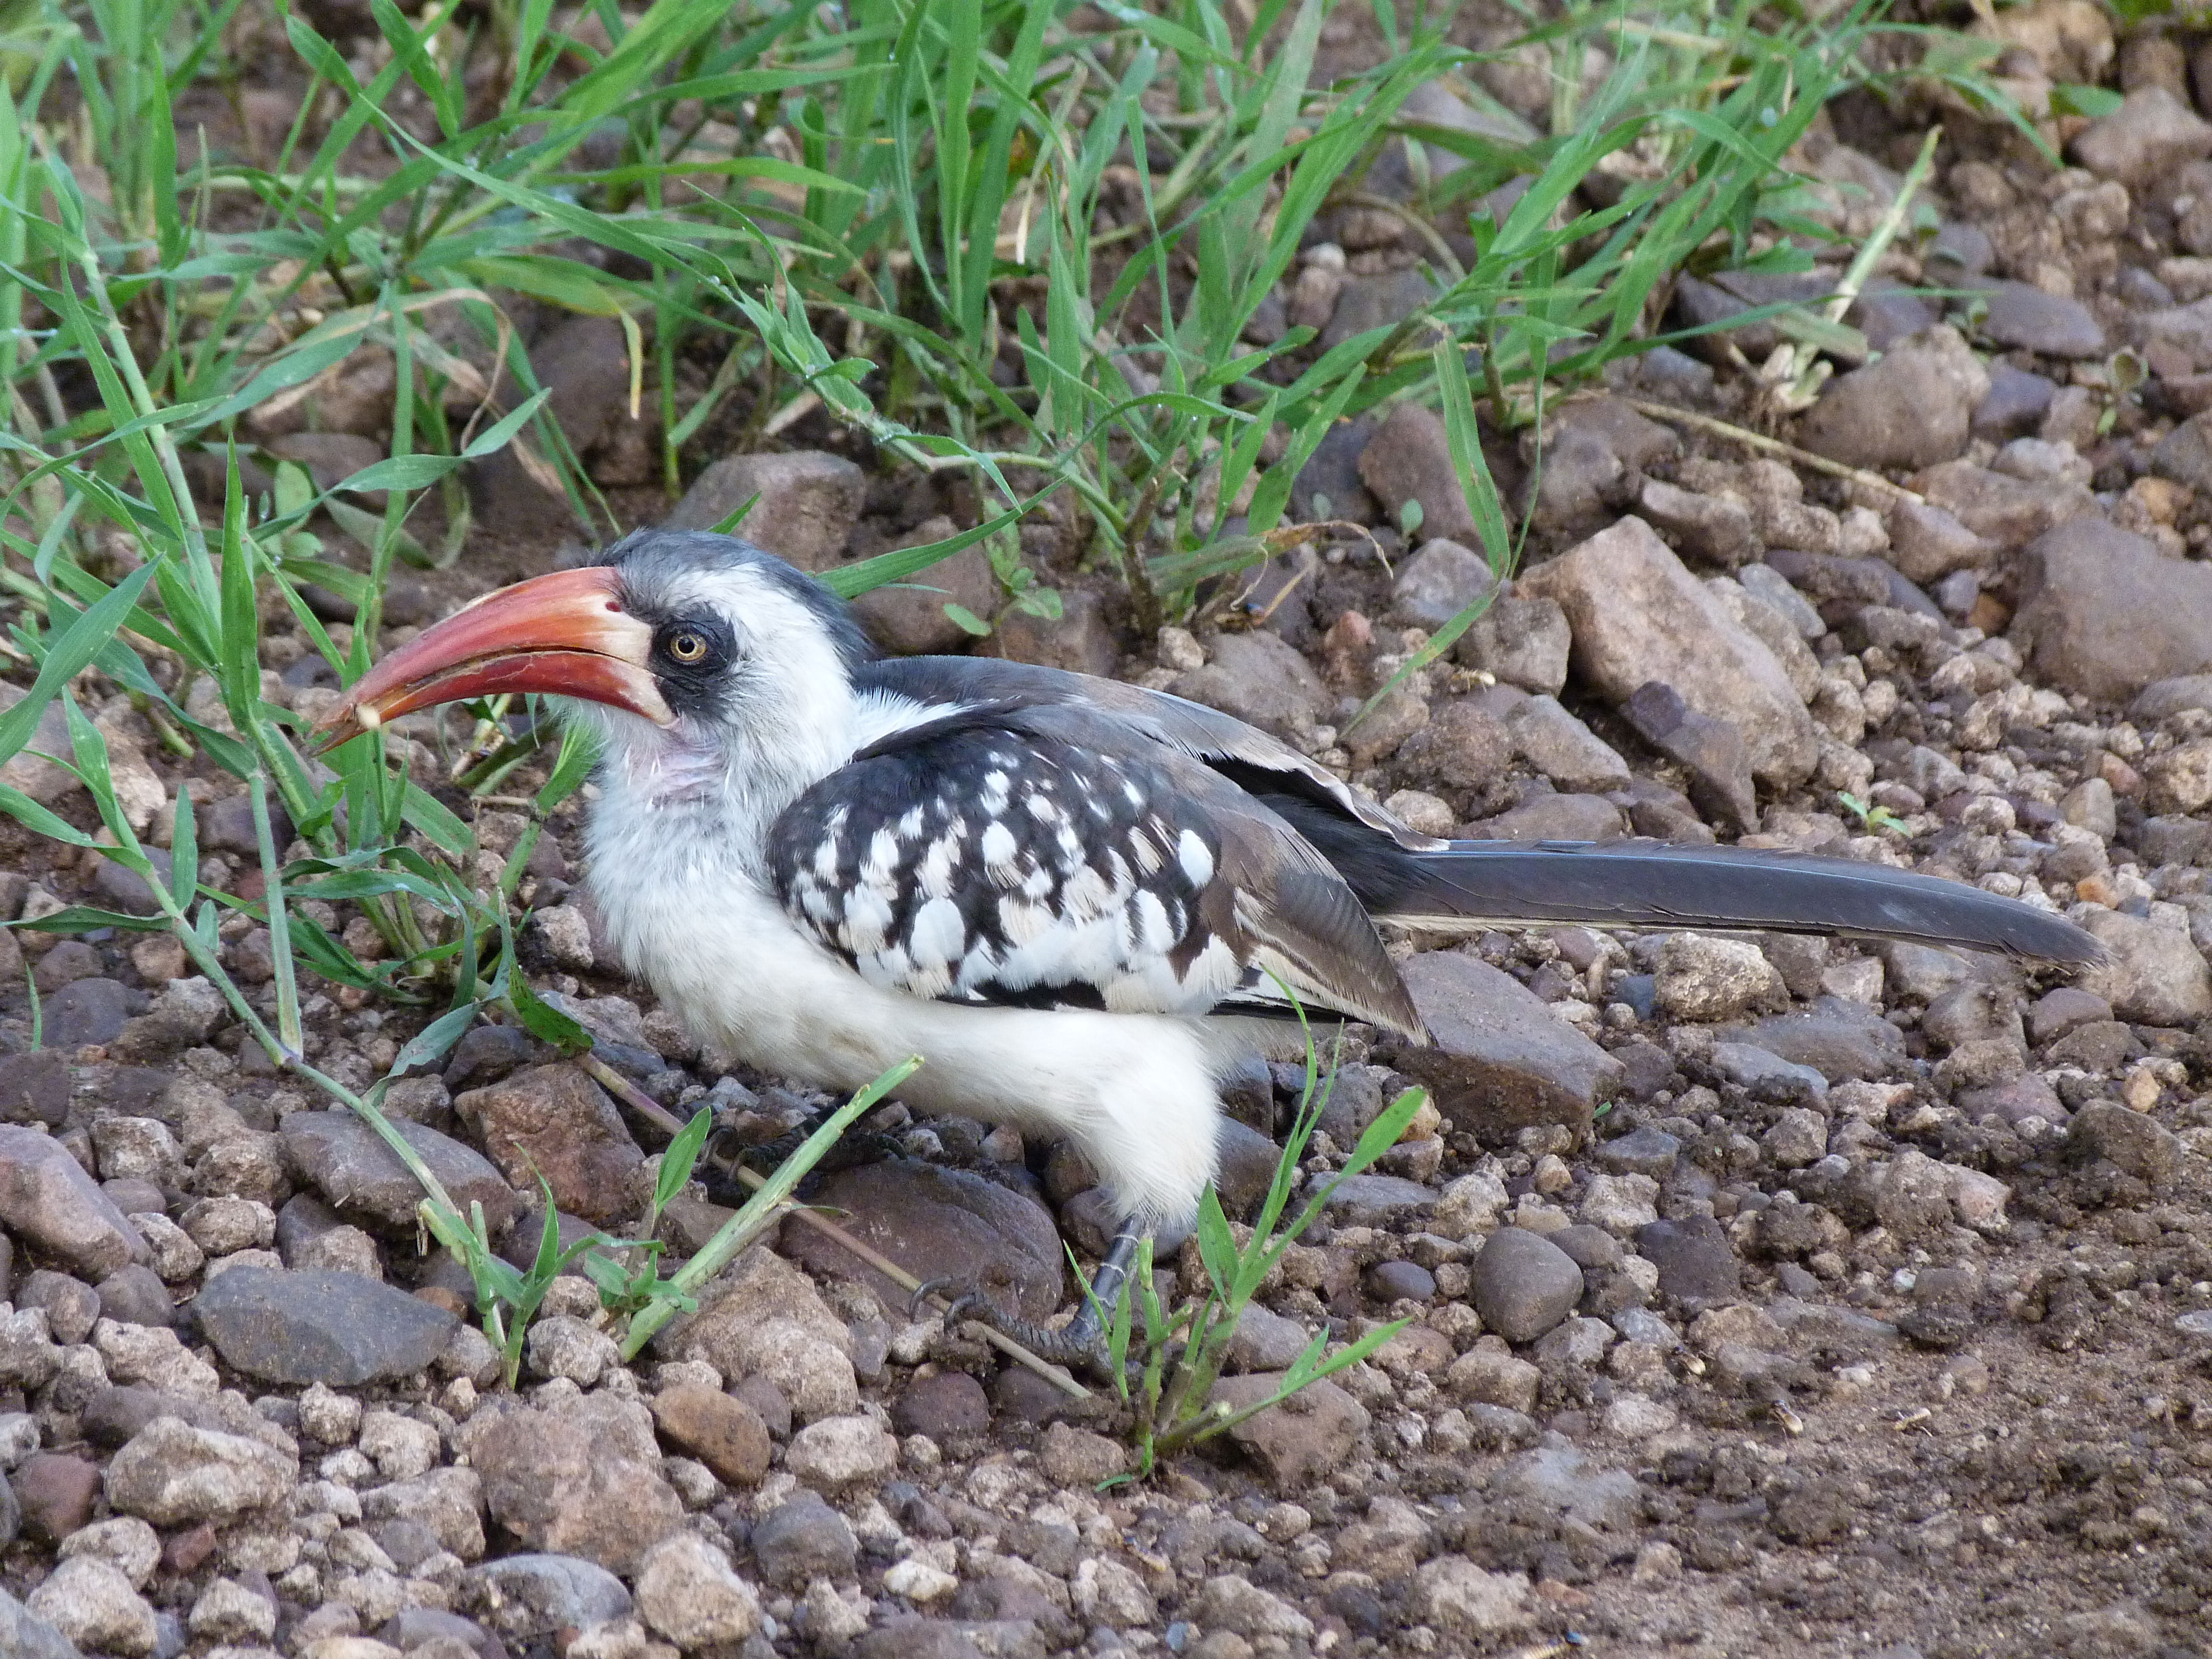 Image: The recently described Ruaha Hornbill (Tockus ruahae) is found only in the dry bush country of Tanzania